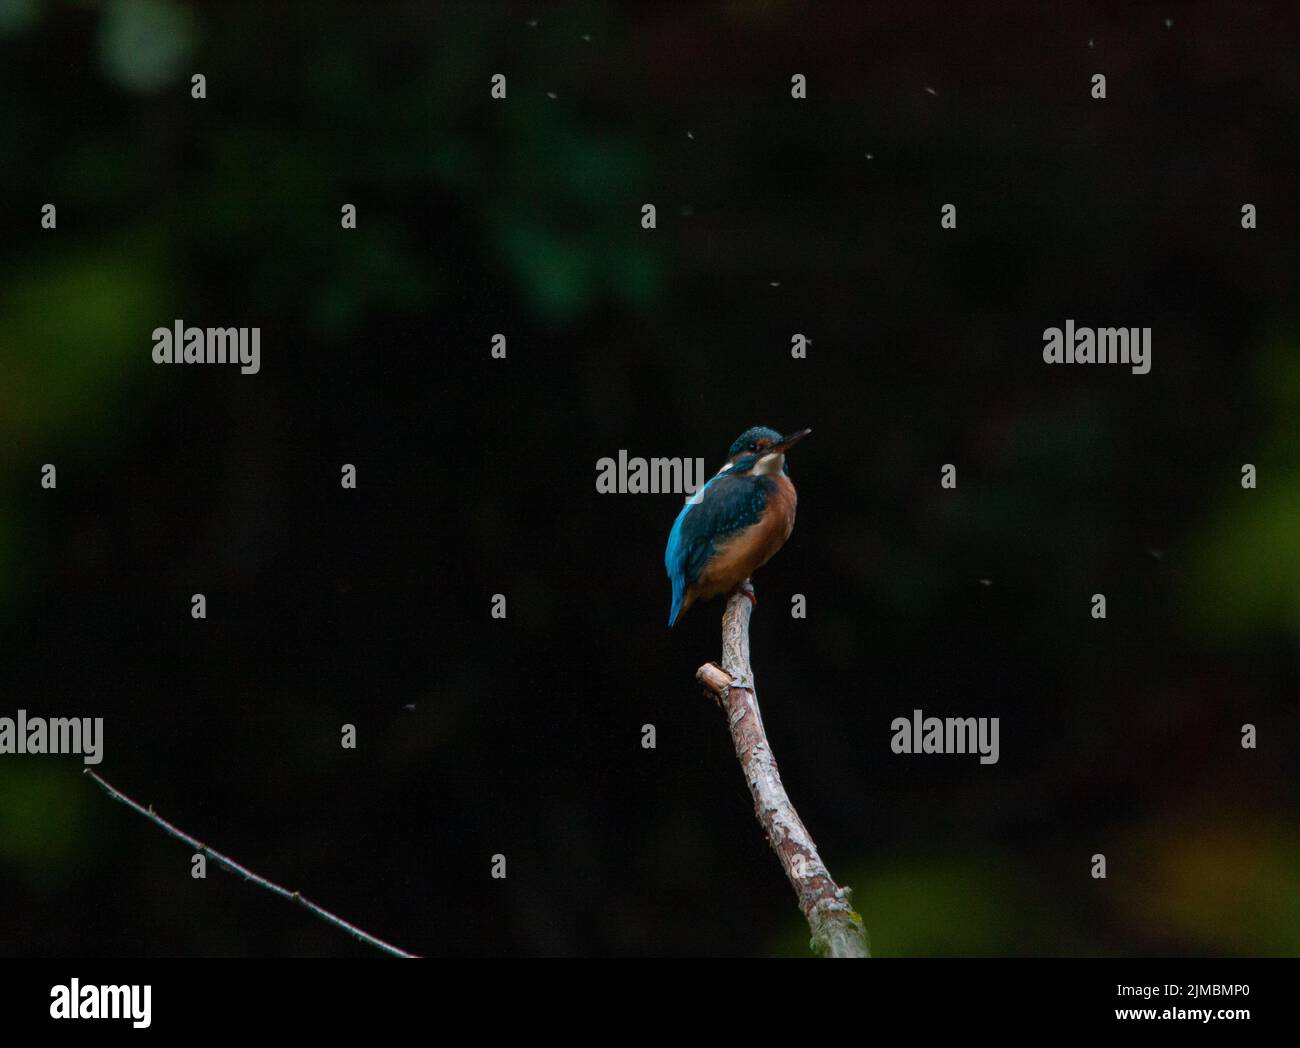 a kingfisher on its branch Stock Photo